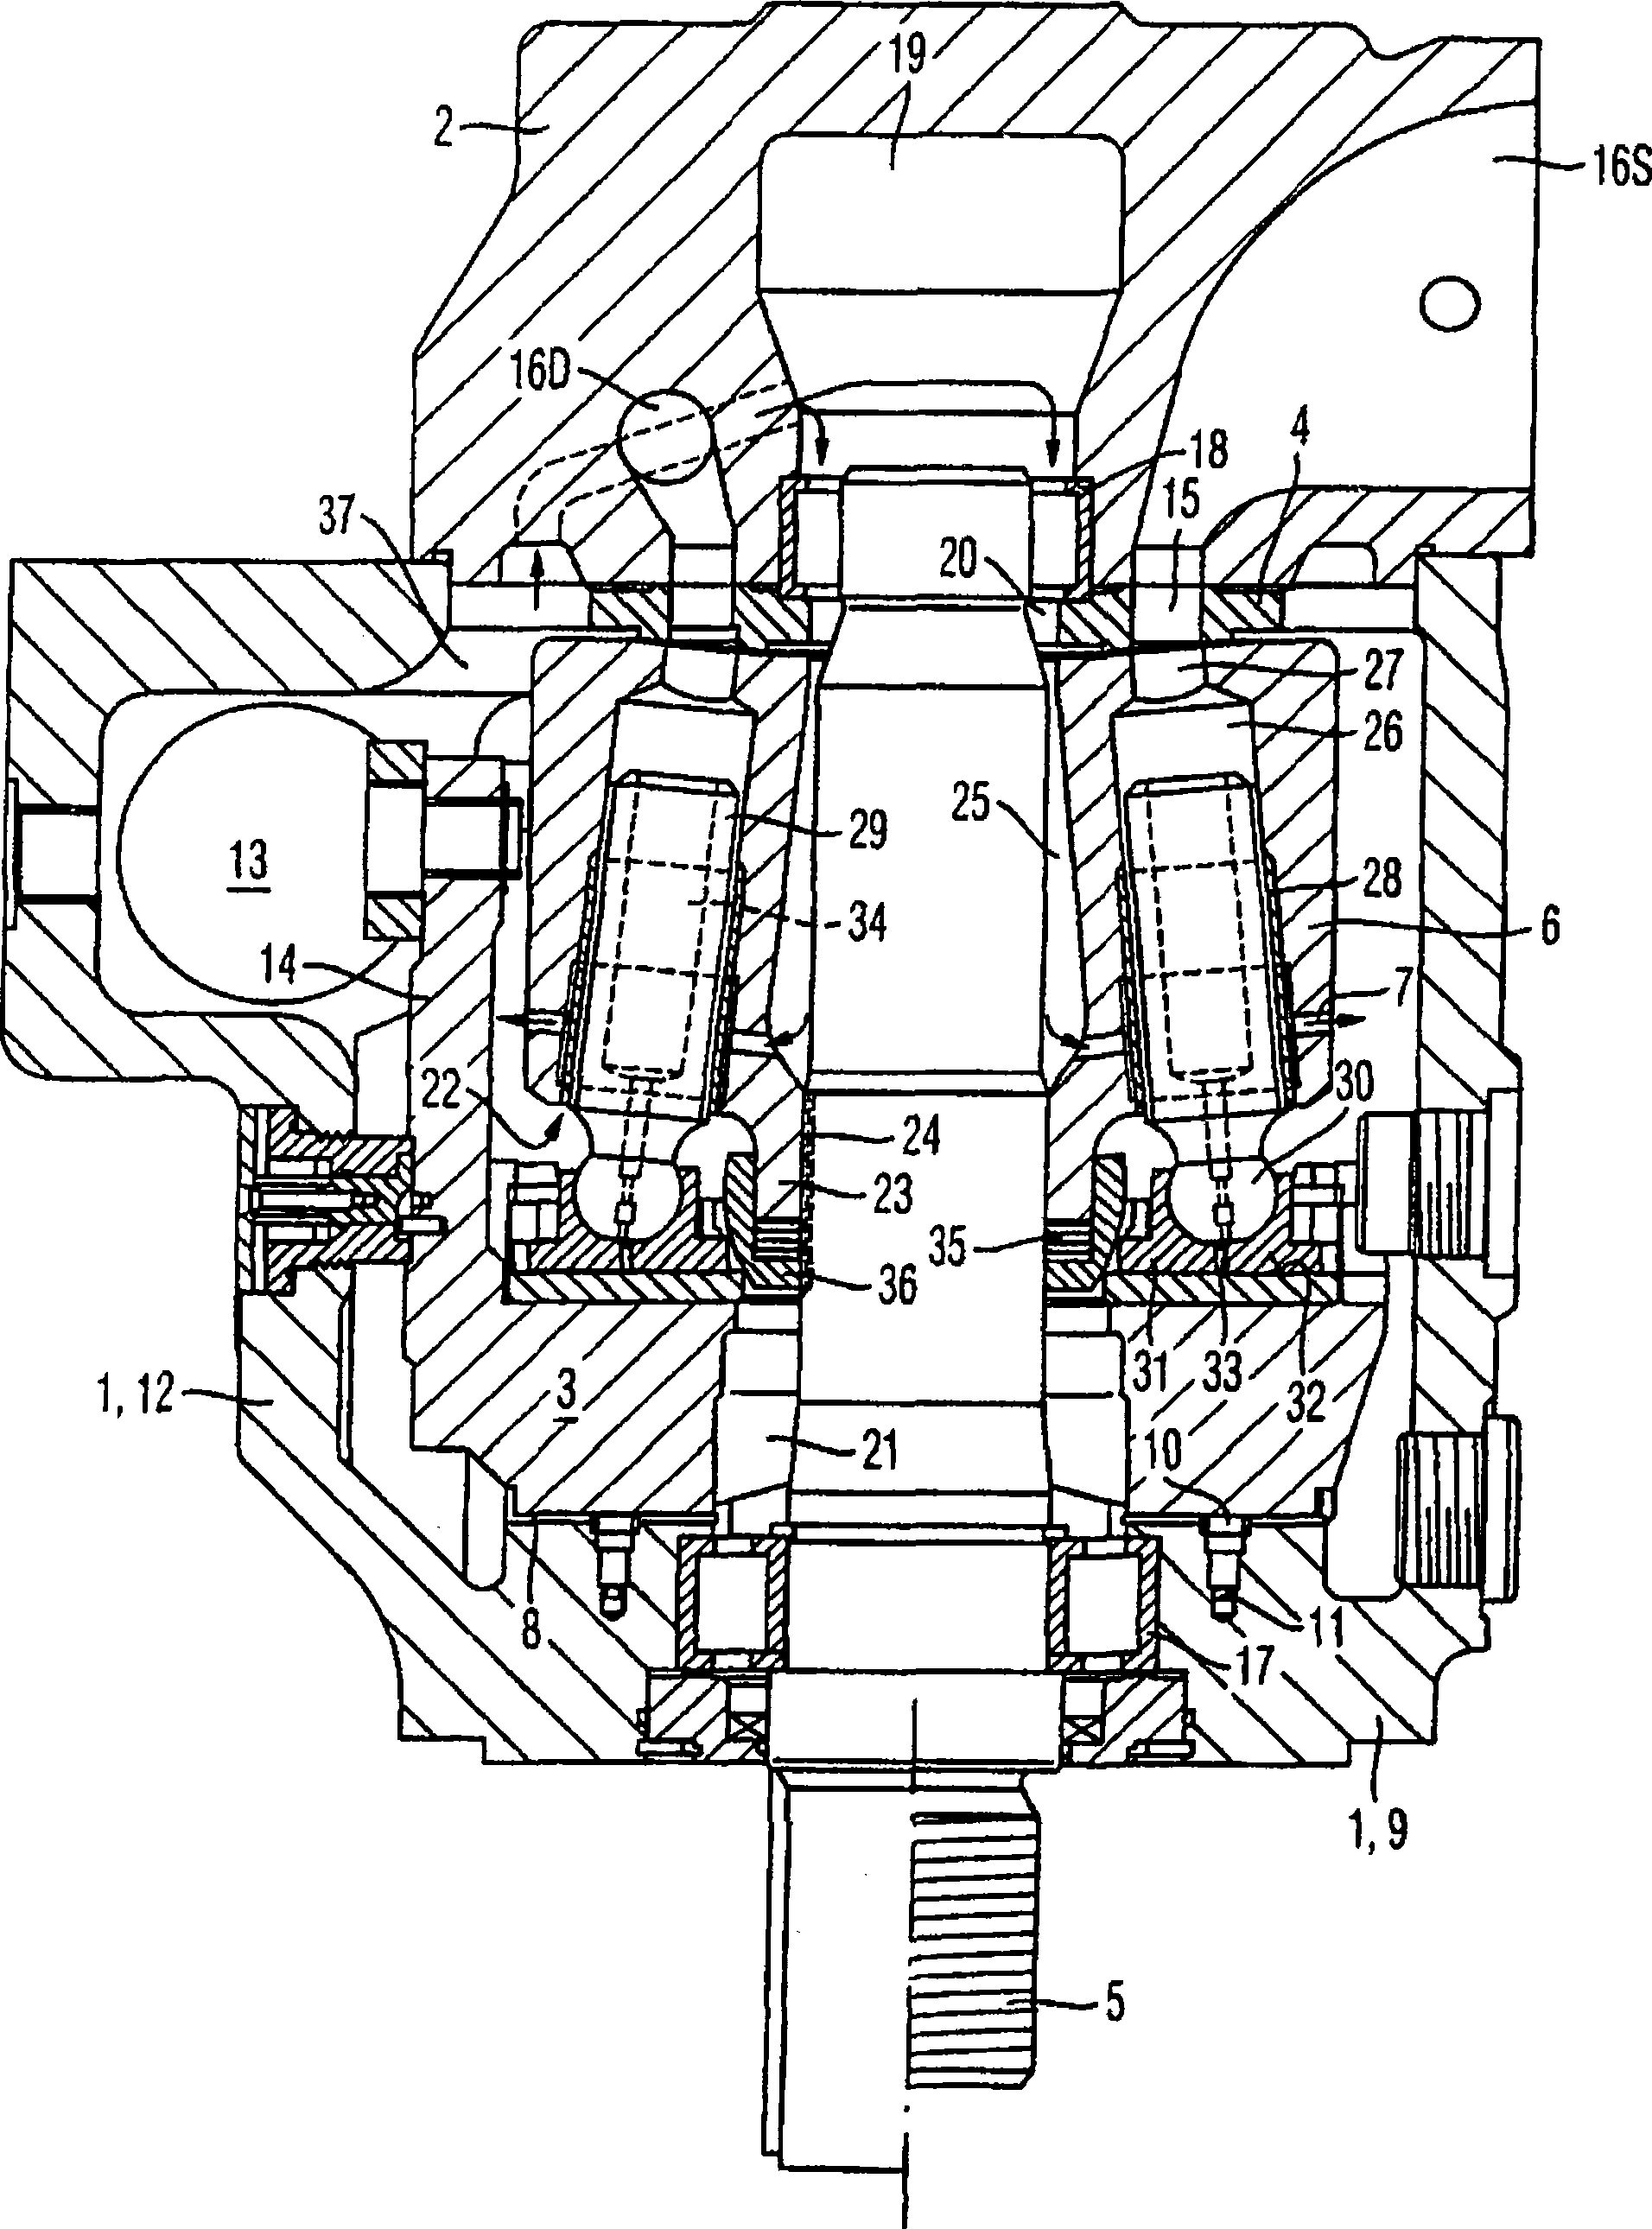 Axial piston machine having a hydrostatic support of the hold-down